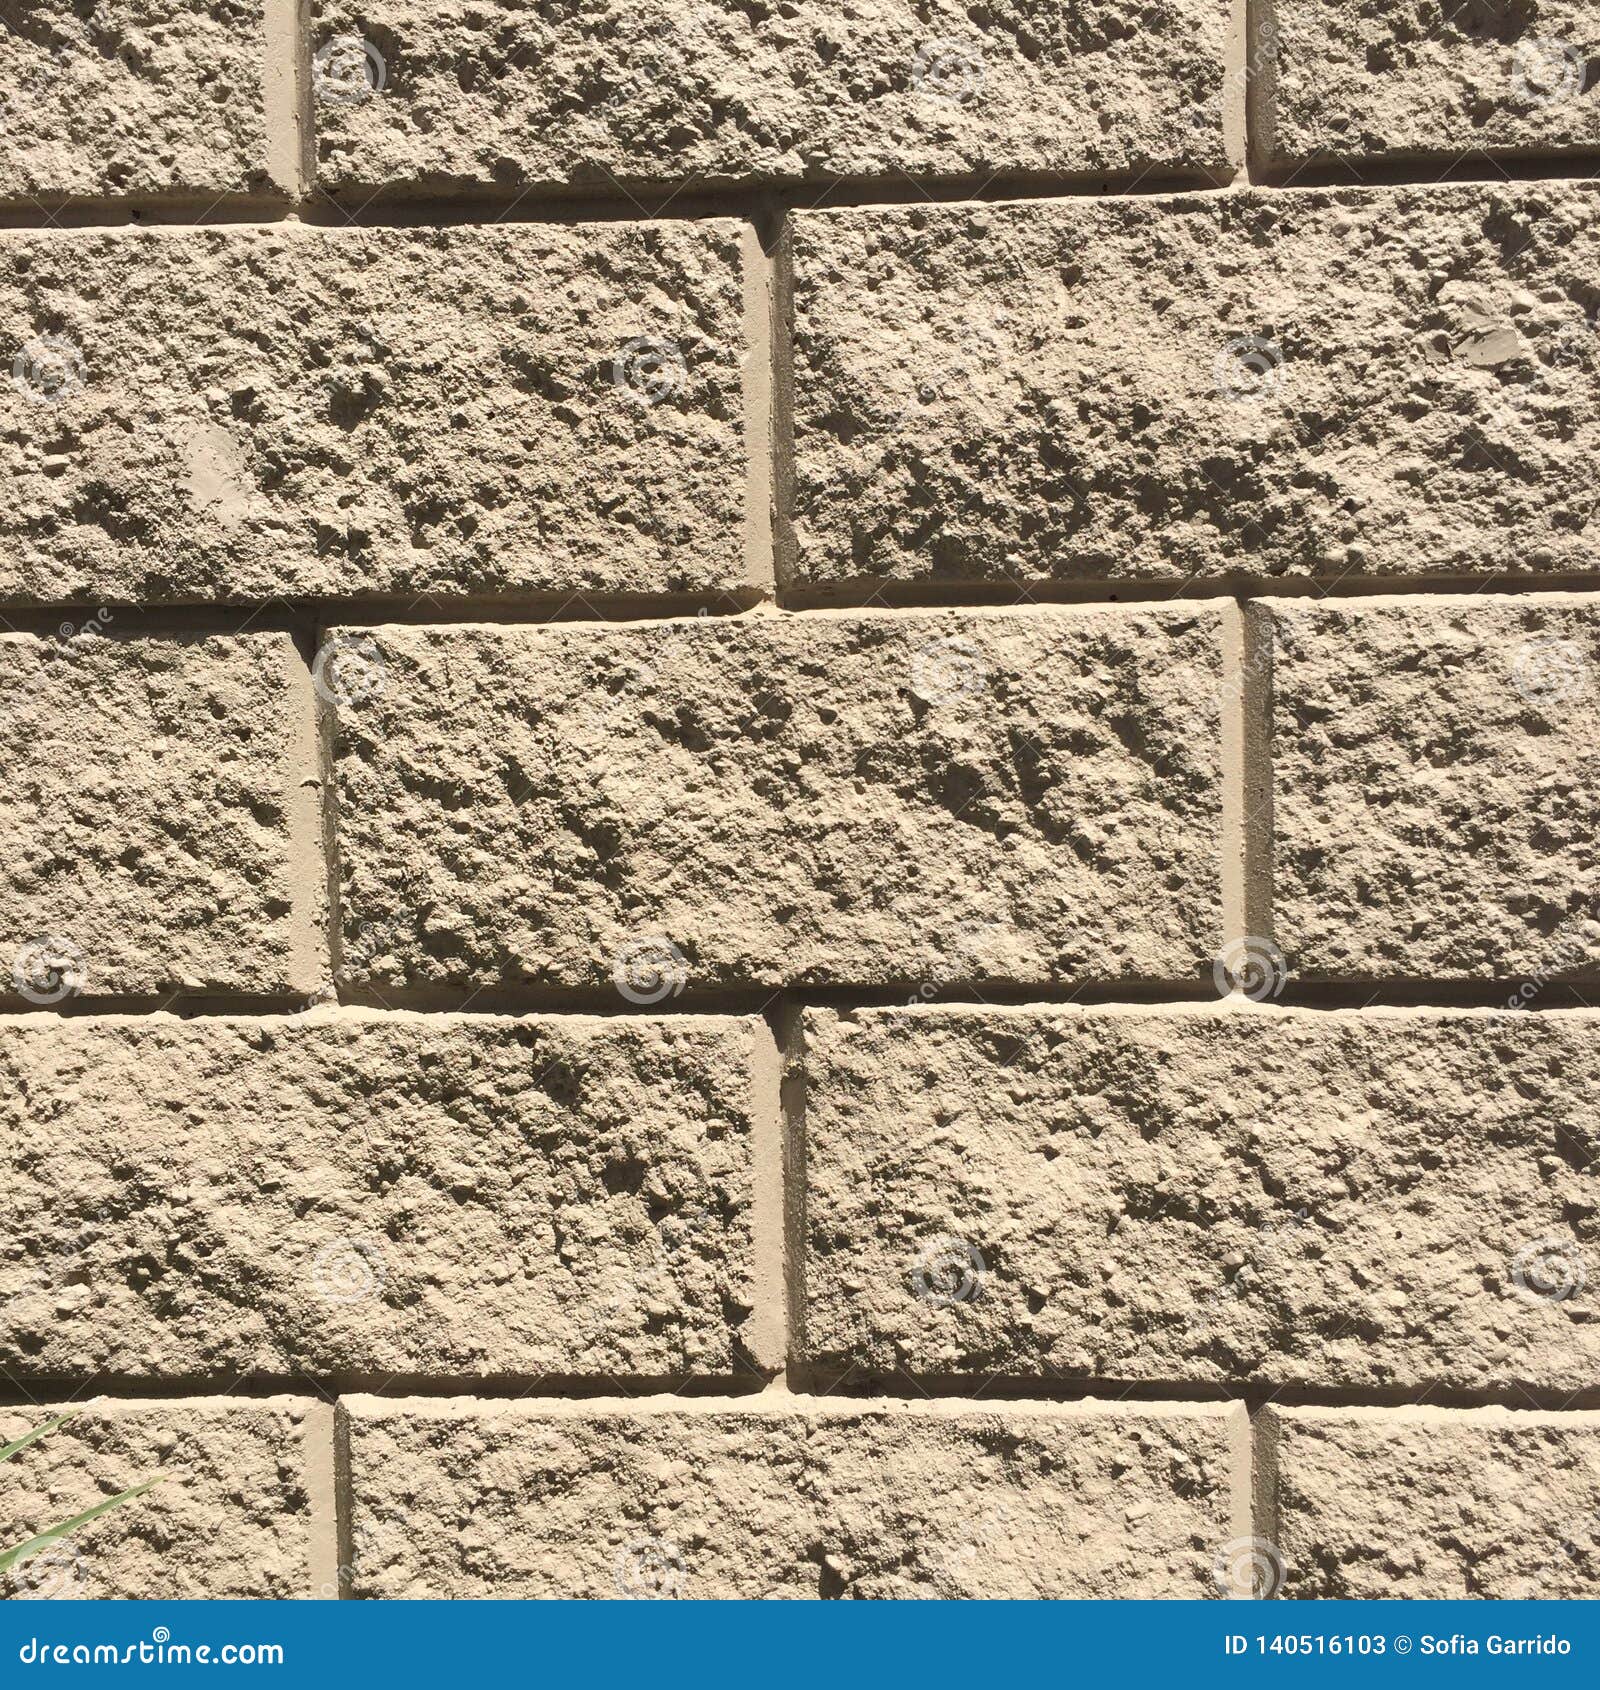 Textured Wall Background with Bricks Stock Image - Image of wall, bricks:  140516103